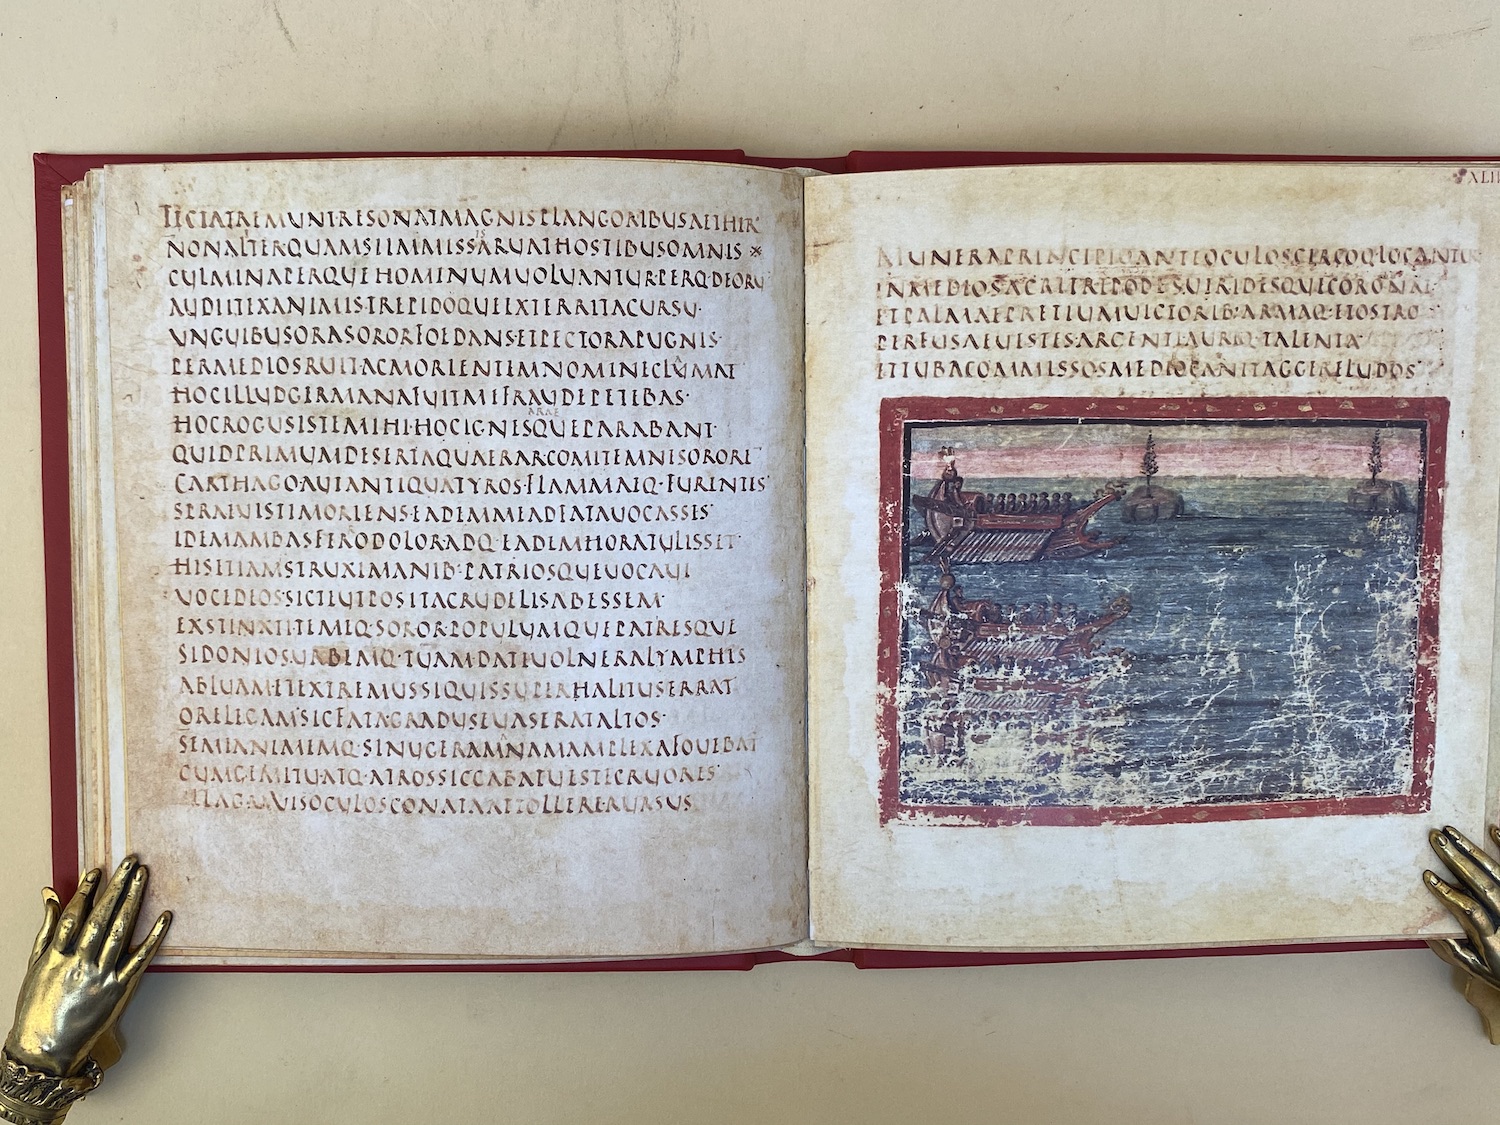 Page opening from the Akademische Druck facsimile of the Vergilius Vaticanus in my library, emphasizing the majestic rustic capitals in which the text was written, without word spacing.